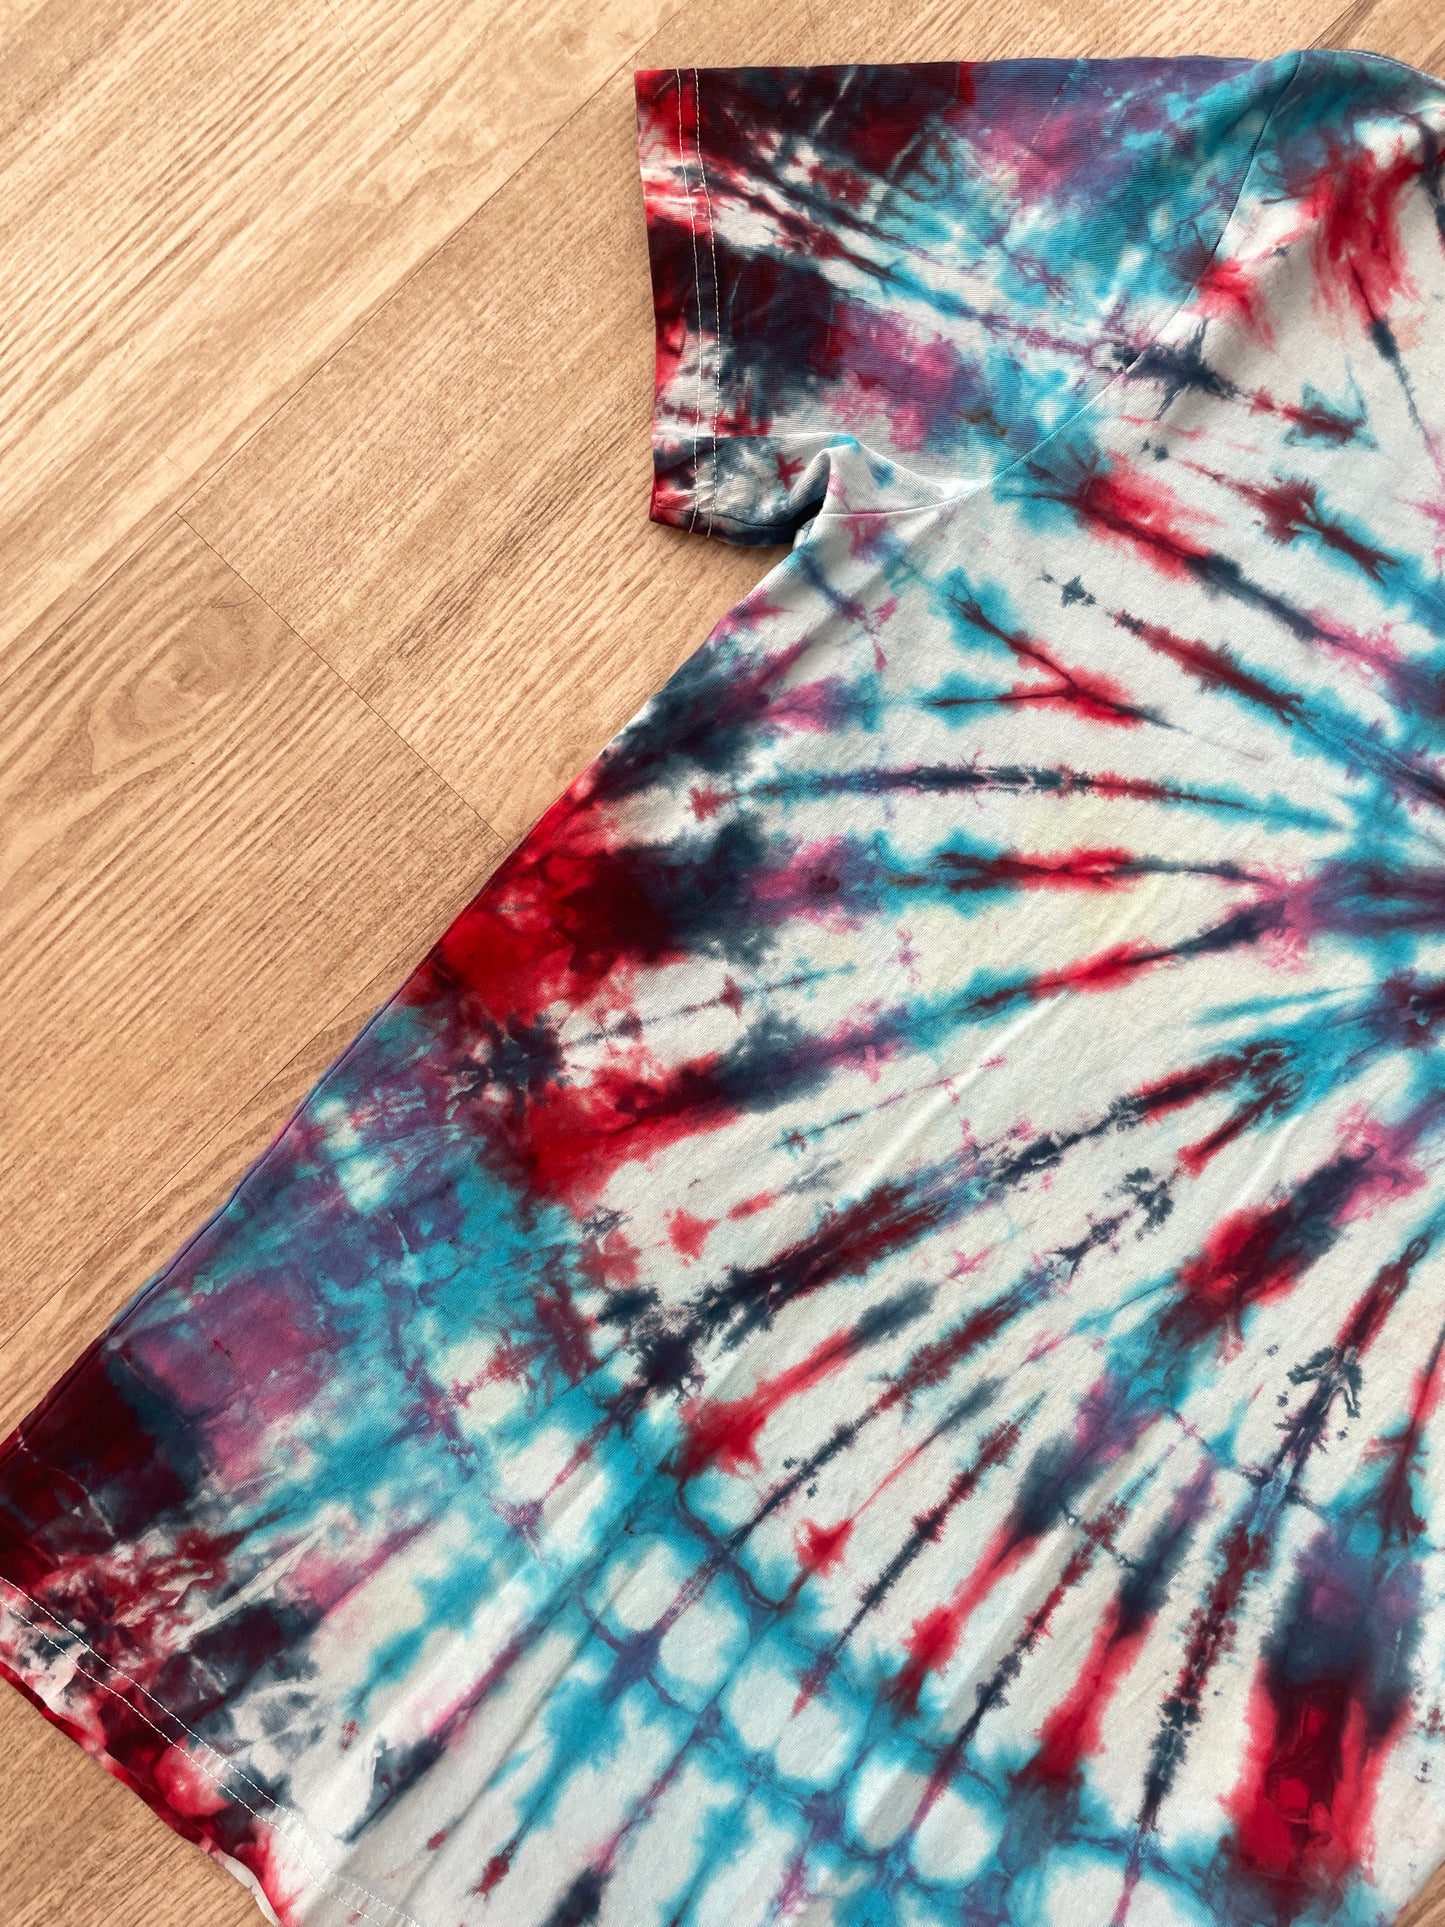 SMALL NASA Humans in Space Handmade Tie Dye Short Sleeve T-Shirt | One-Of-a-Kind Upcycled Red, White, and Blue Spiral Top